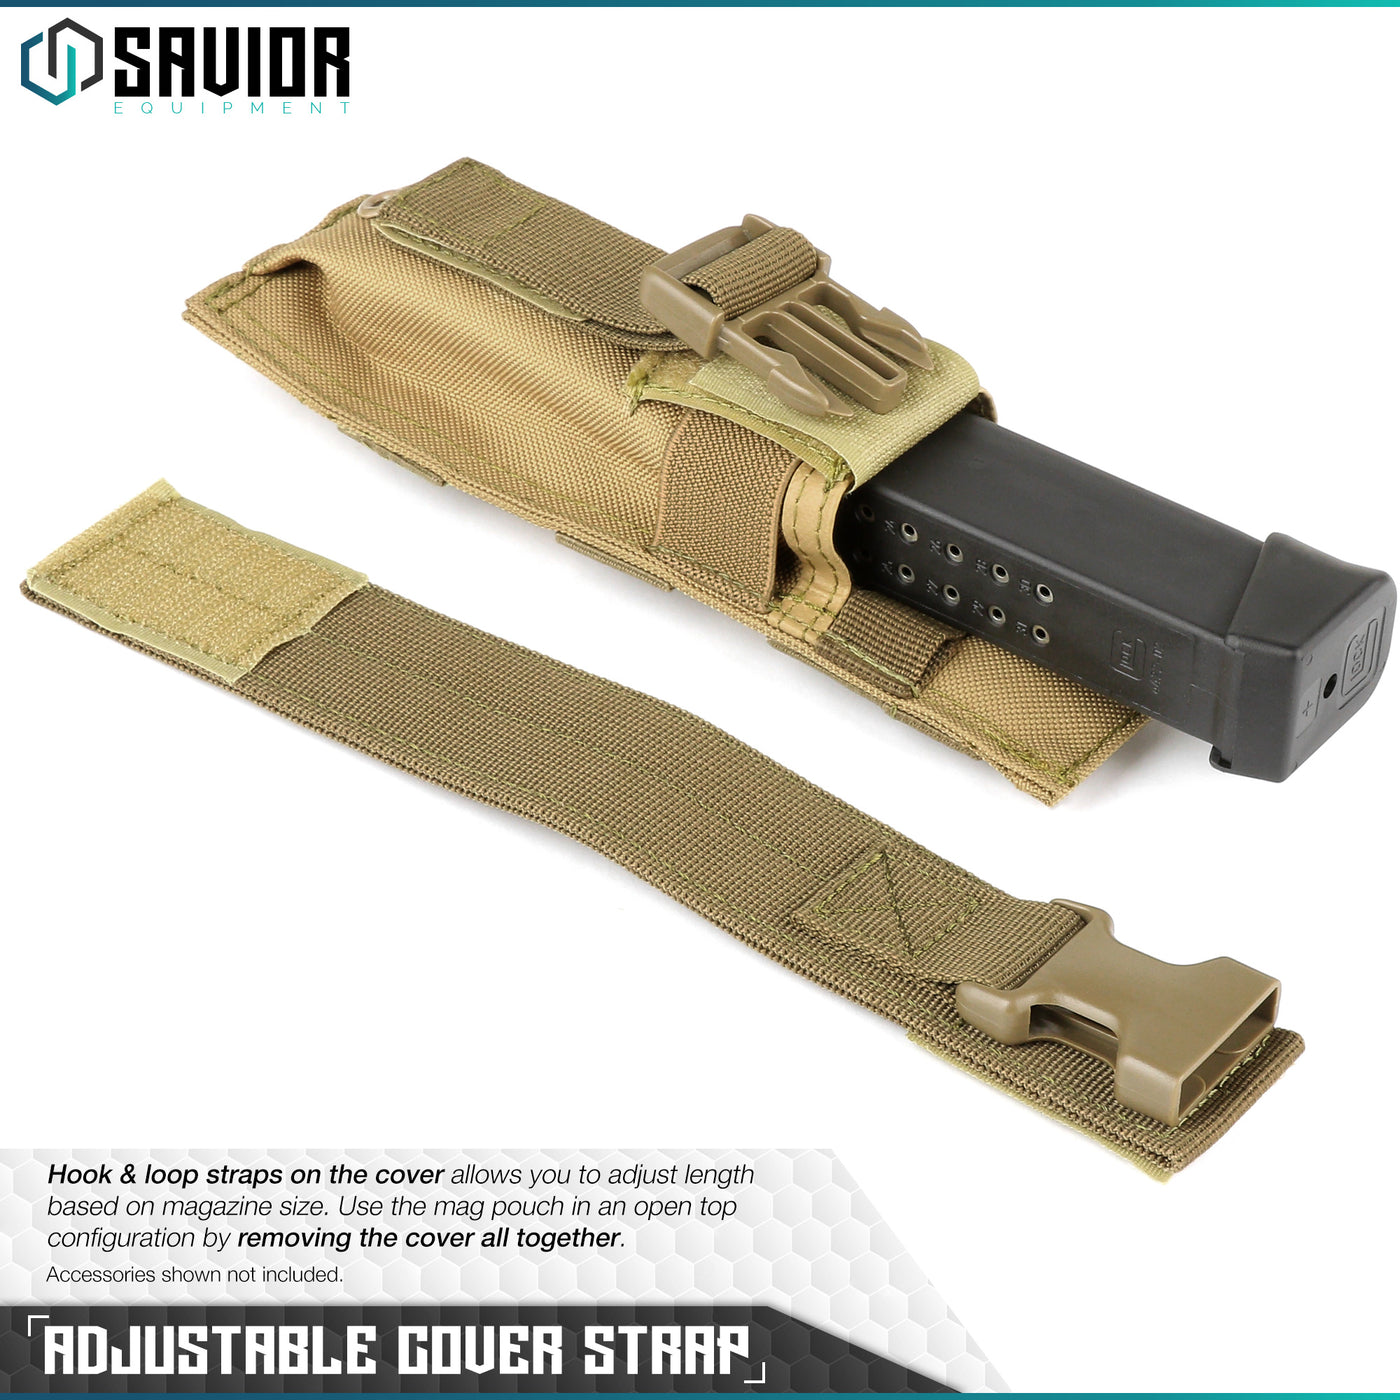 Adjustable Cover Strap - Hook & Loop Strap on the Cover Allows you to Adjust Length Based on Magazine Size. Use the mag Pouch in an Open-Top Configuration by Removing the Cover. Accessories shown not included.